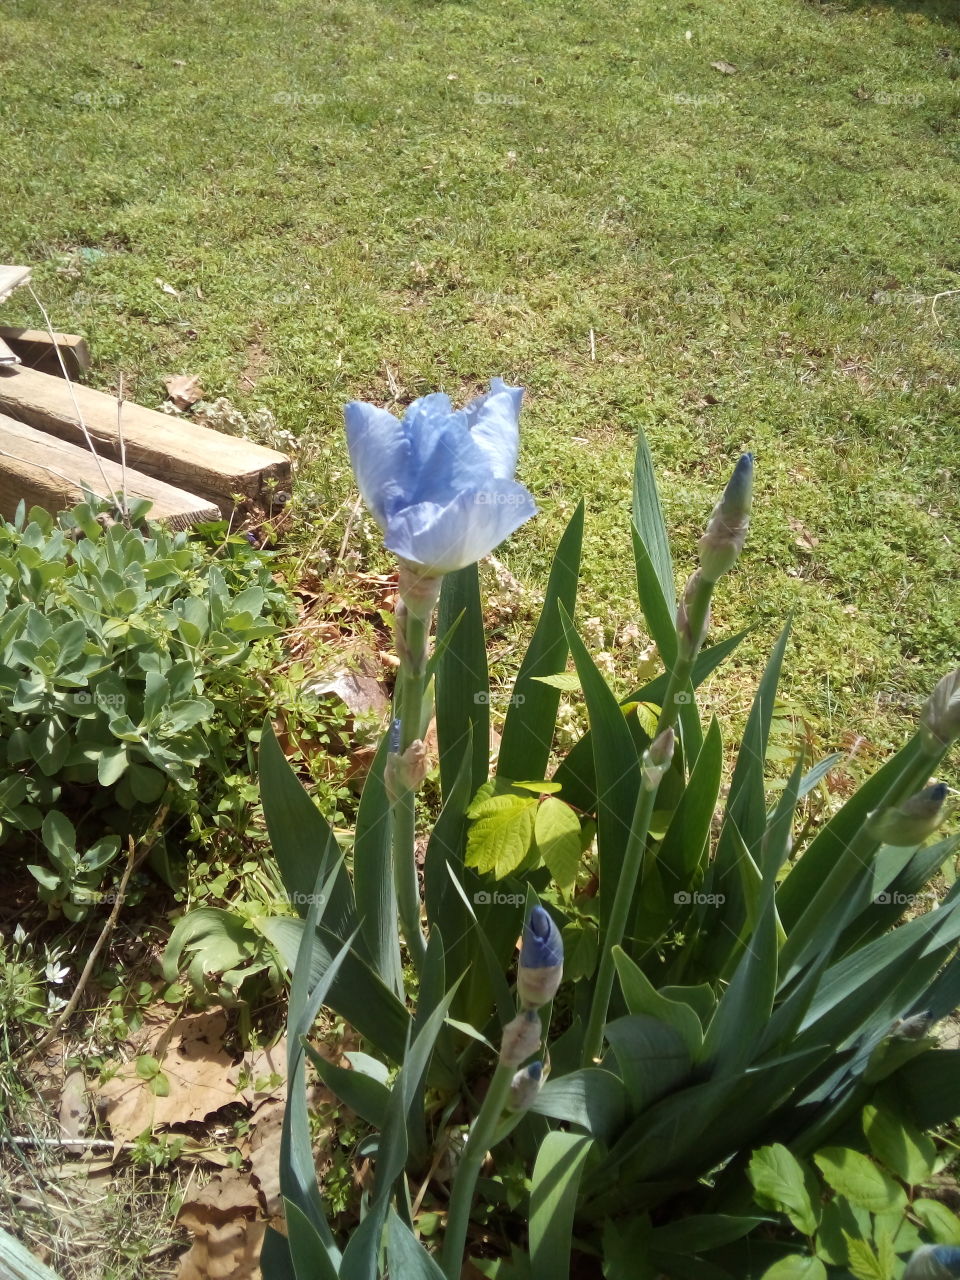 first iris bloom of the season, there's a lot more coming soon of different shades and colors.